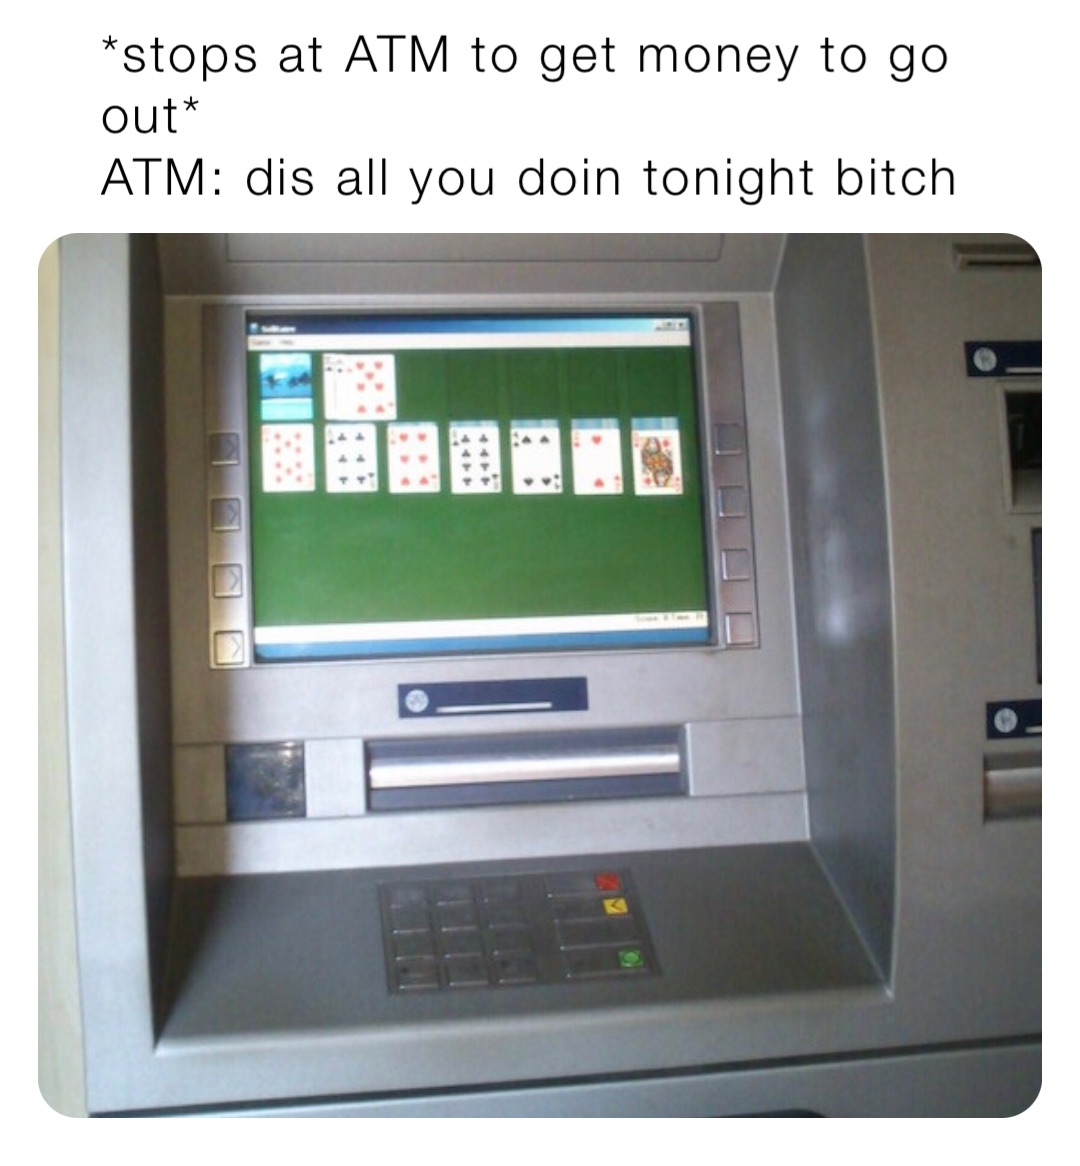 *stops at ATM to get money to go out*
ATM: dis all you doin tonight bitch